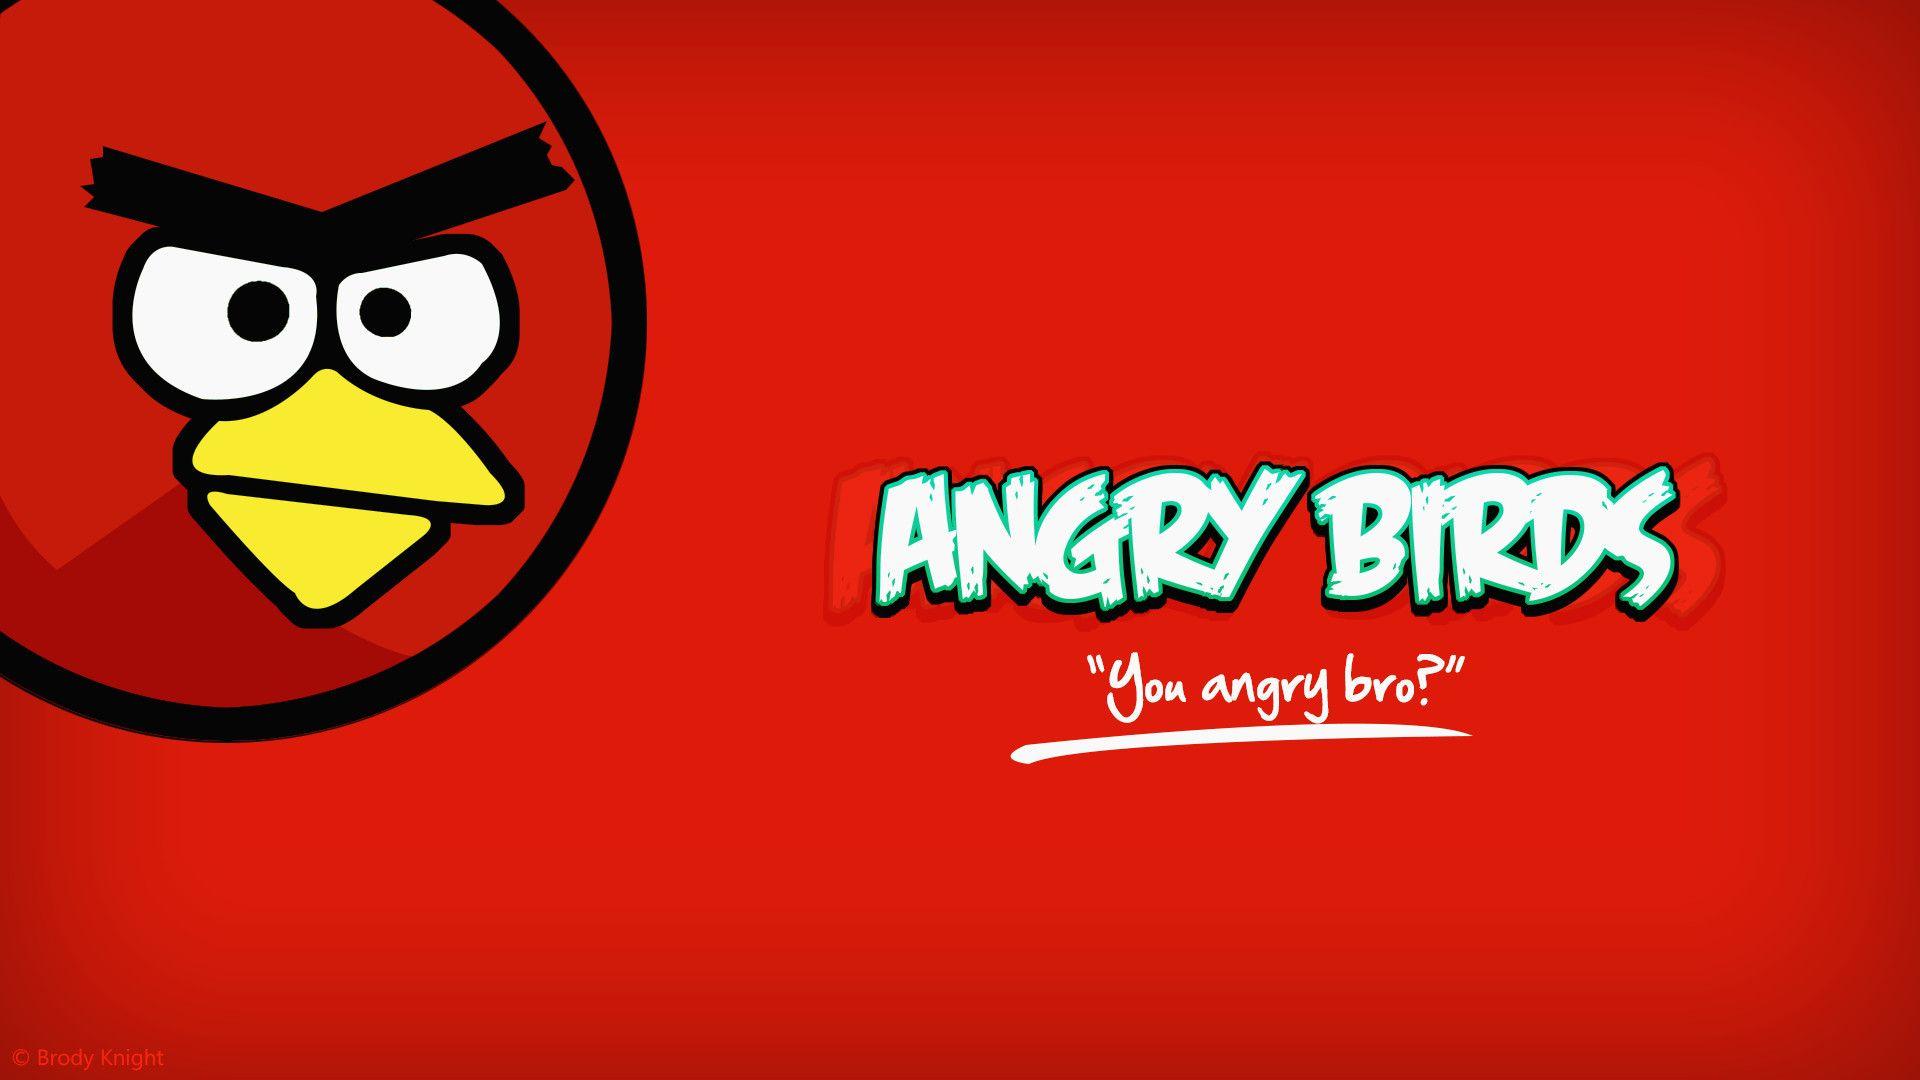 S7 Edge Wallpaper Quotes Best Of Angry Bird Wallpaper Group 86